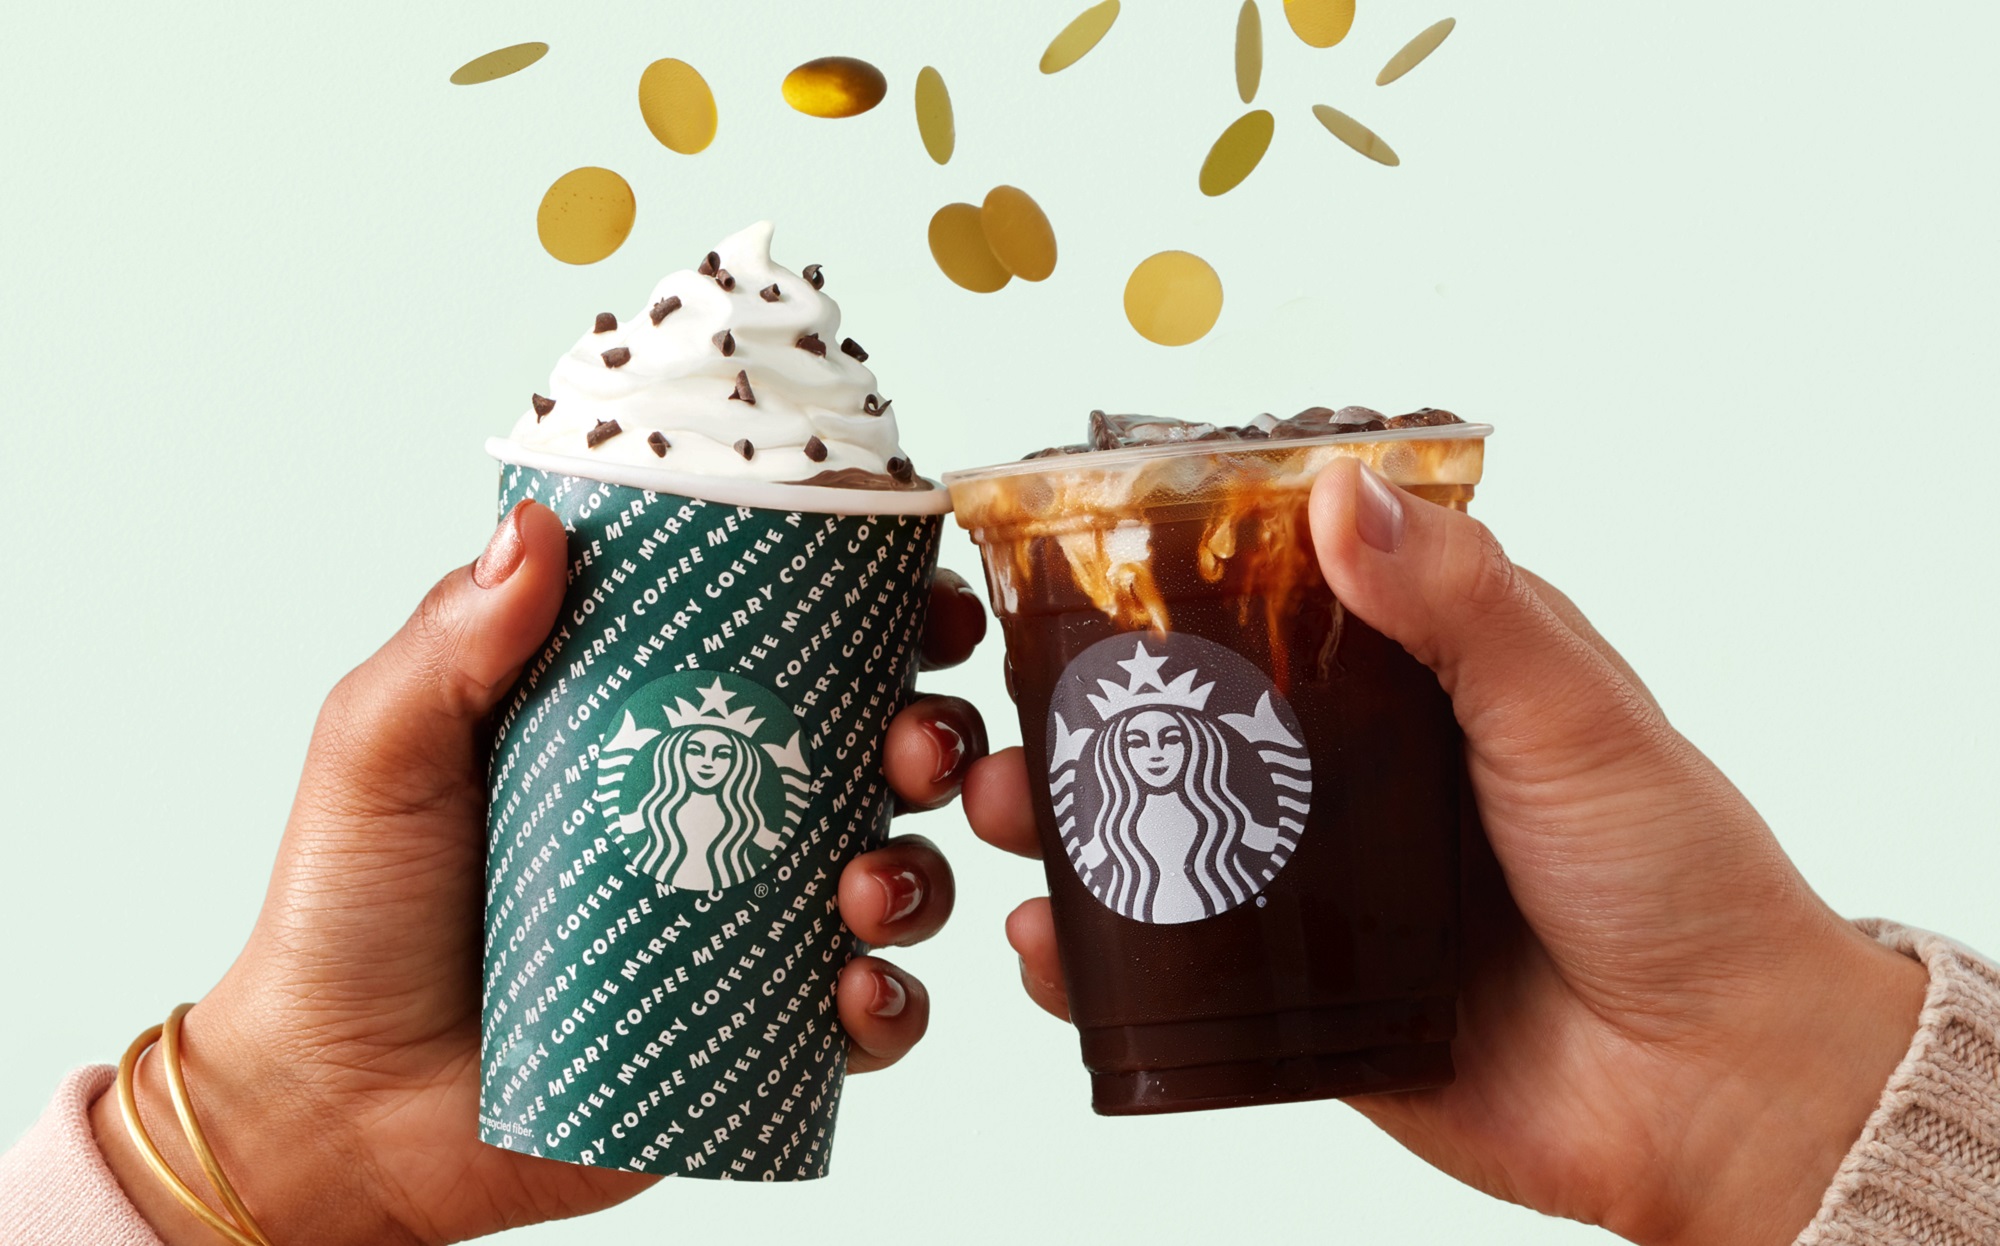 Free Tall Espresso Drinks at Starbucks Through End of 2019